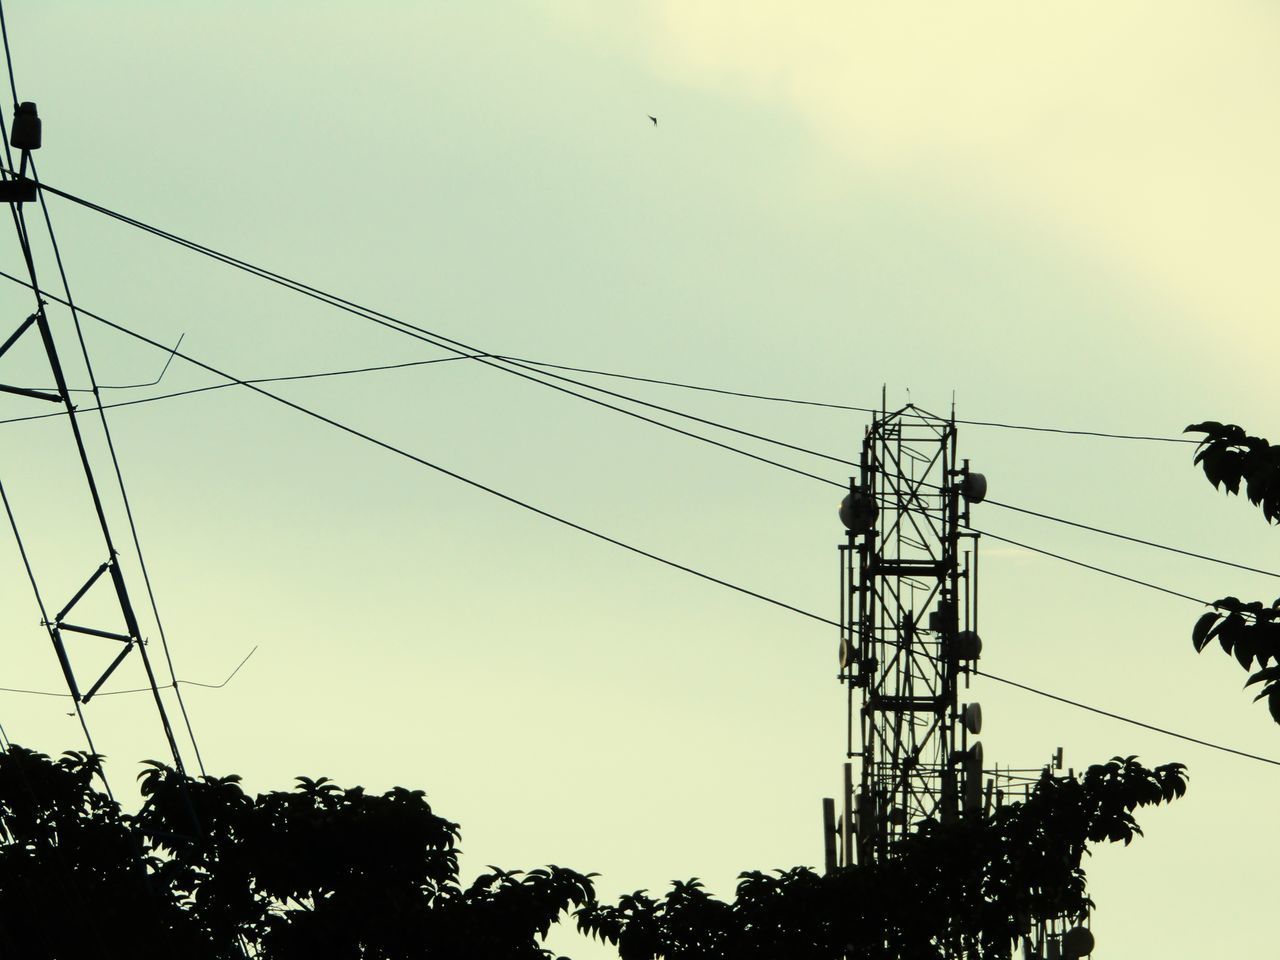 LOW ANGLE VIEW OF SILHOUETTE ELECTRICITY PYLONS AGAINST SKY